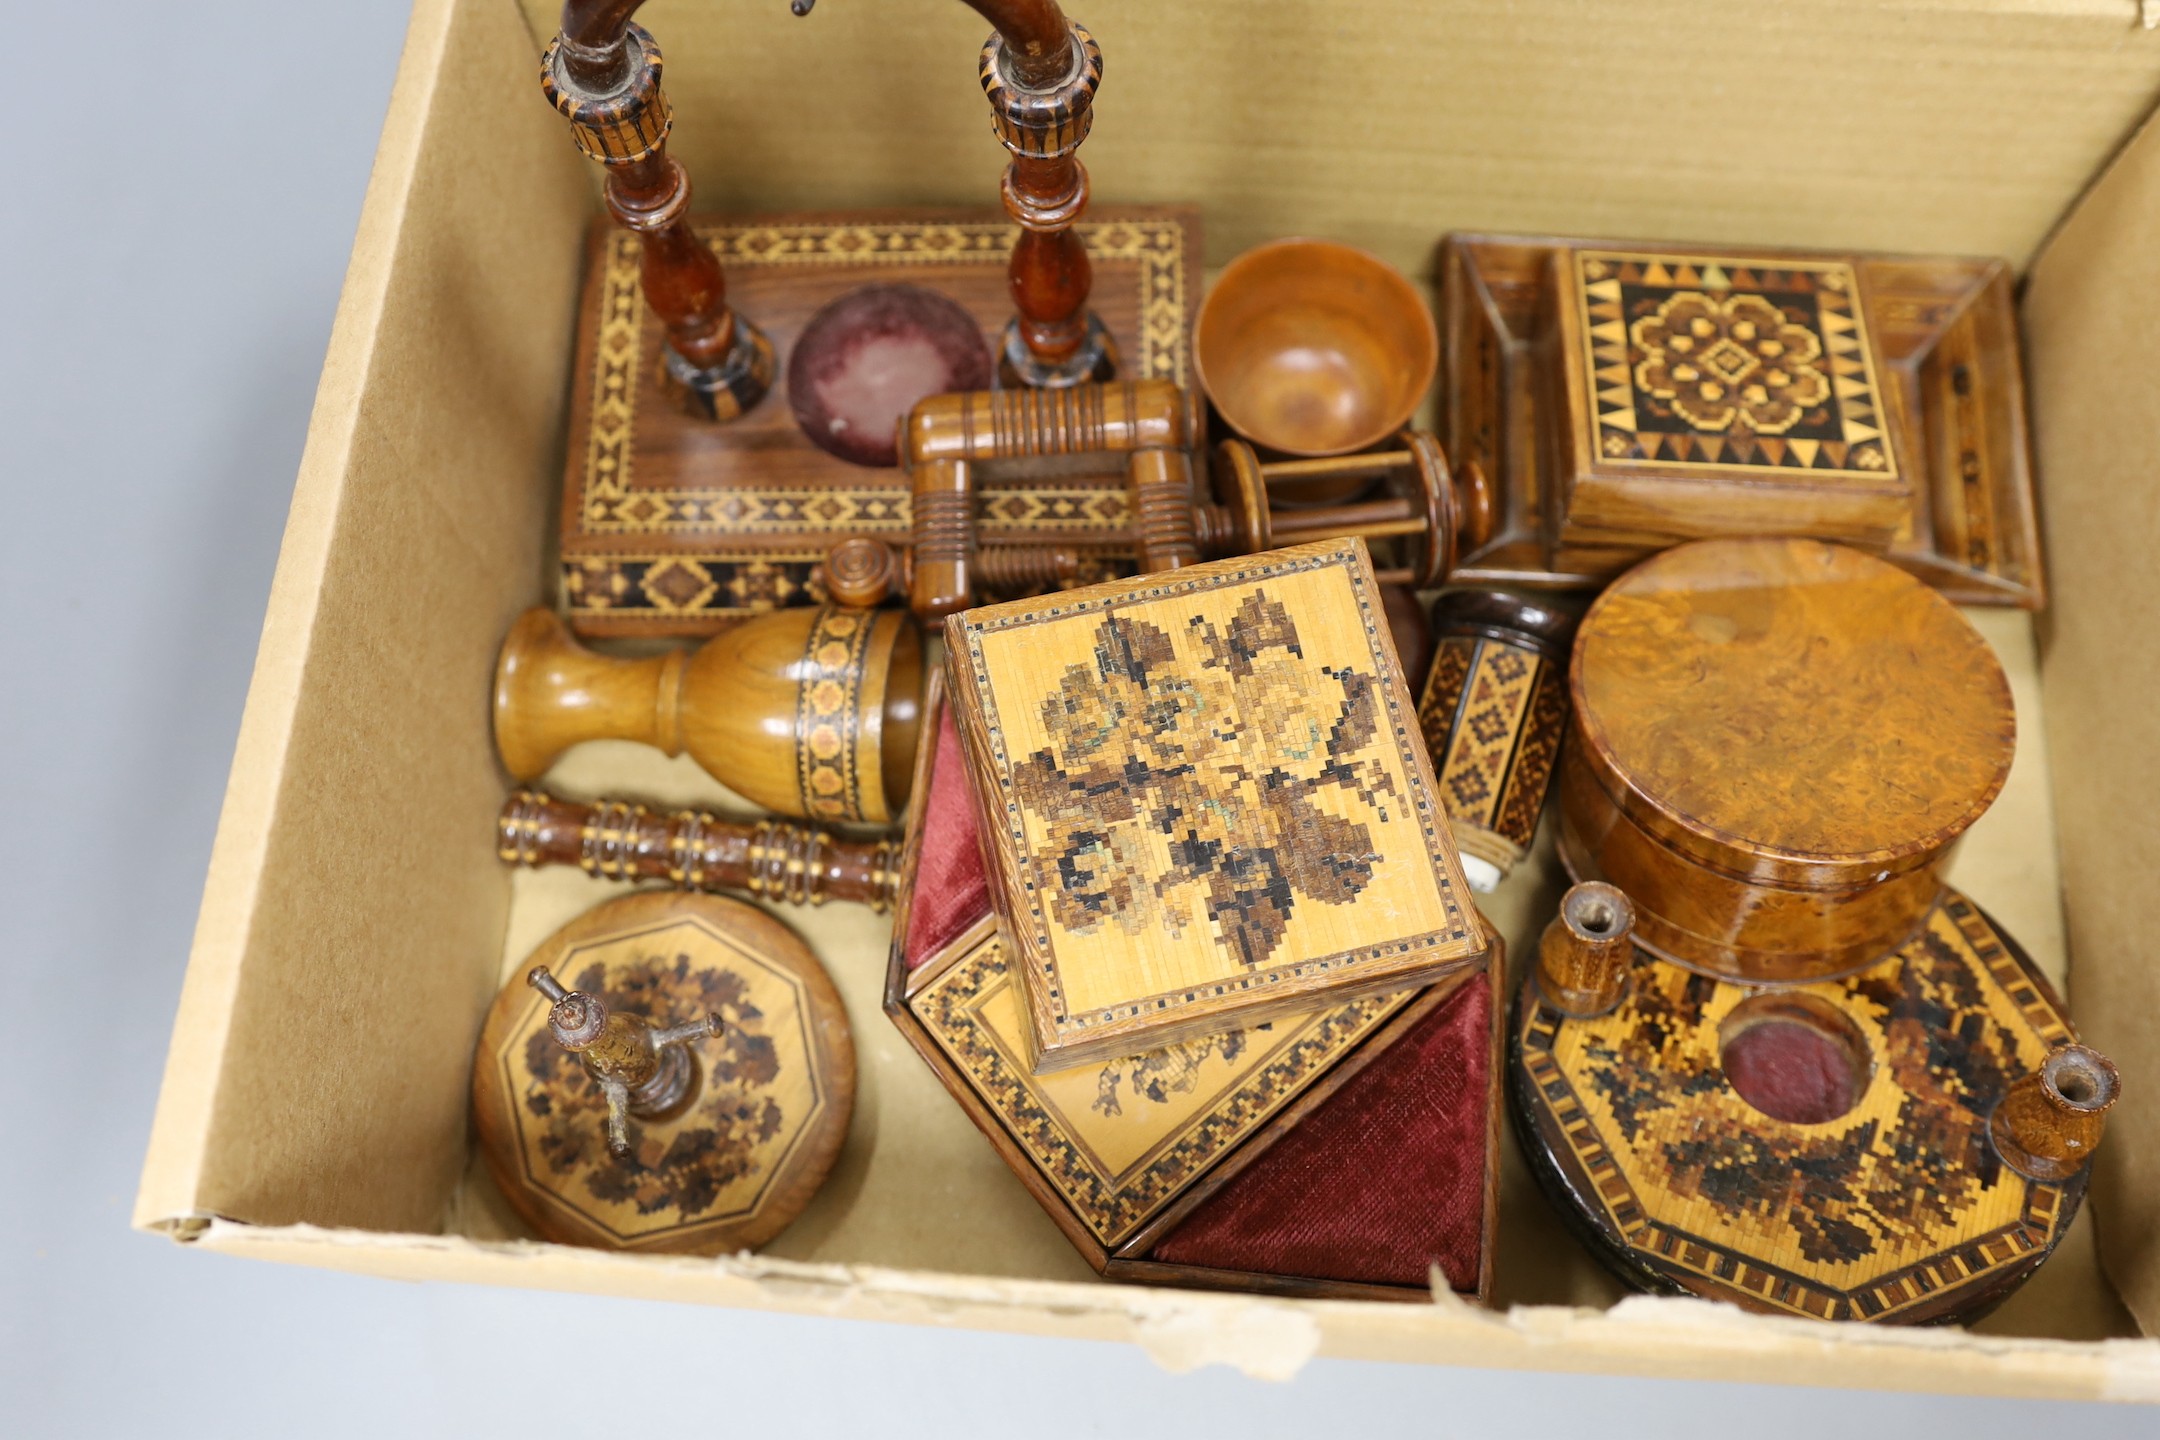 A collection of Tunbridge ware boxes, a watch stand, sewing related items, etc